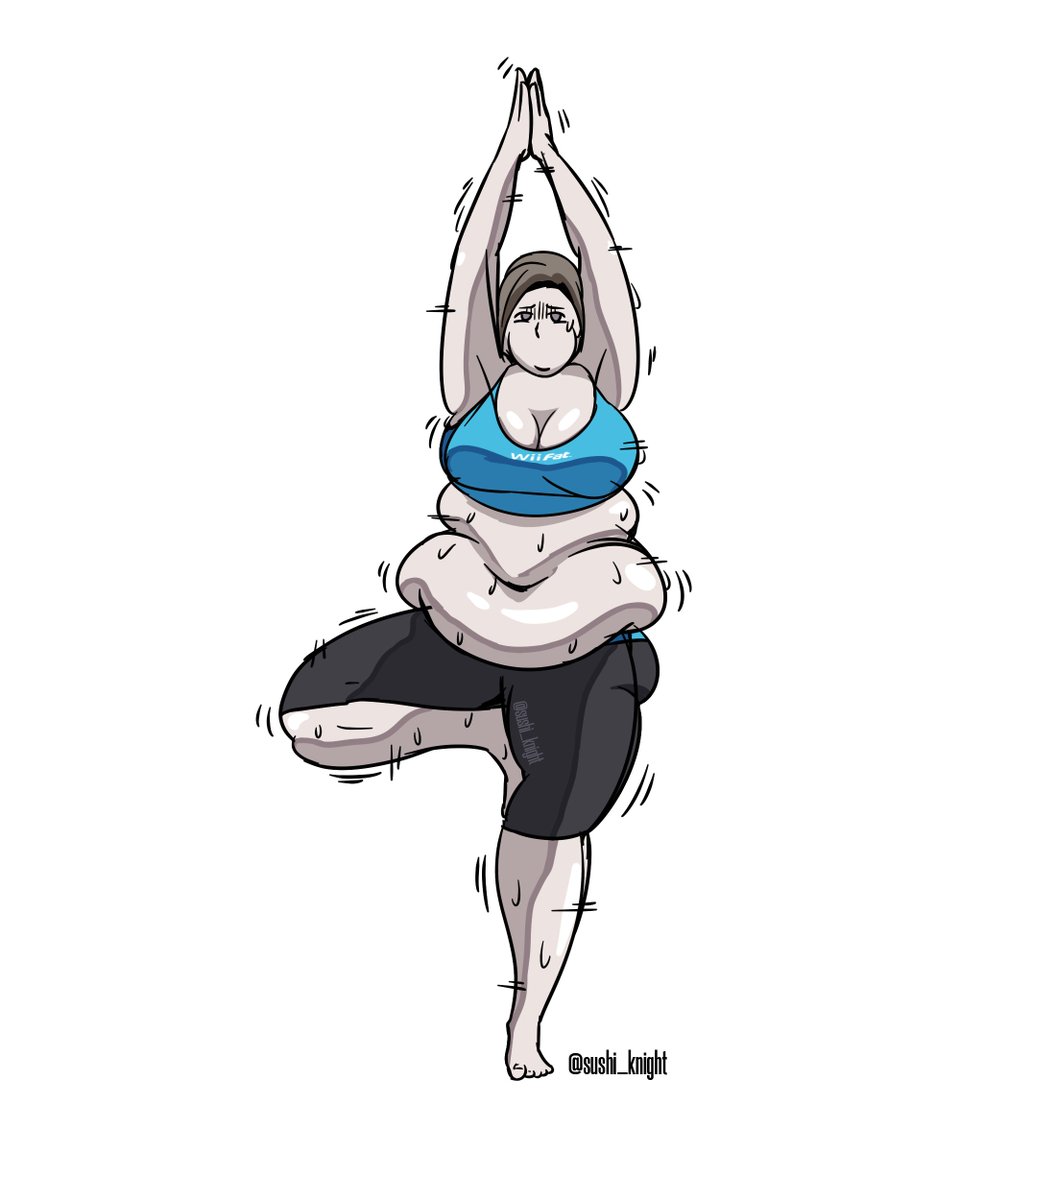 Fuck it, fat Wii Fit Trainer doing yoga.